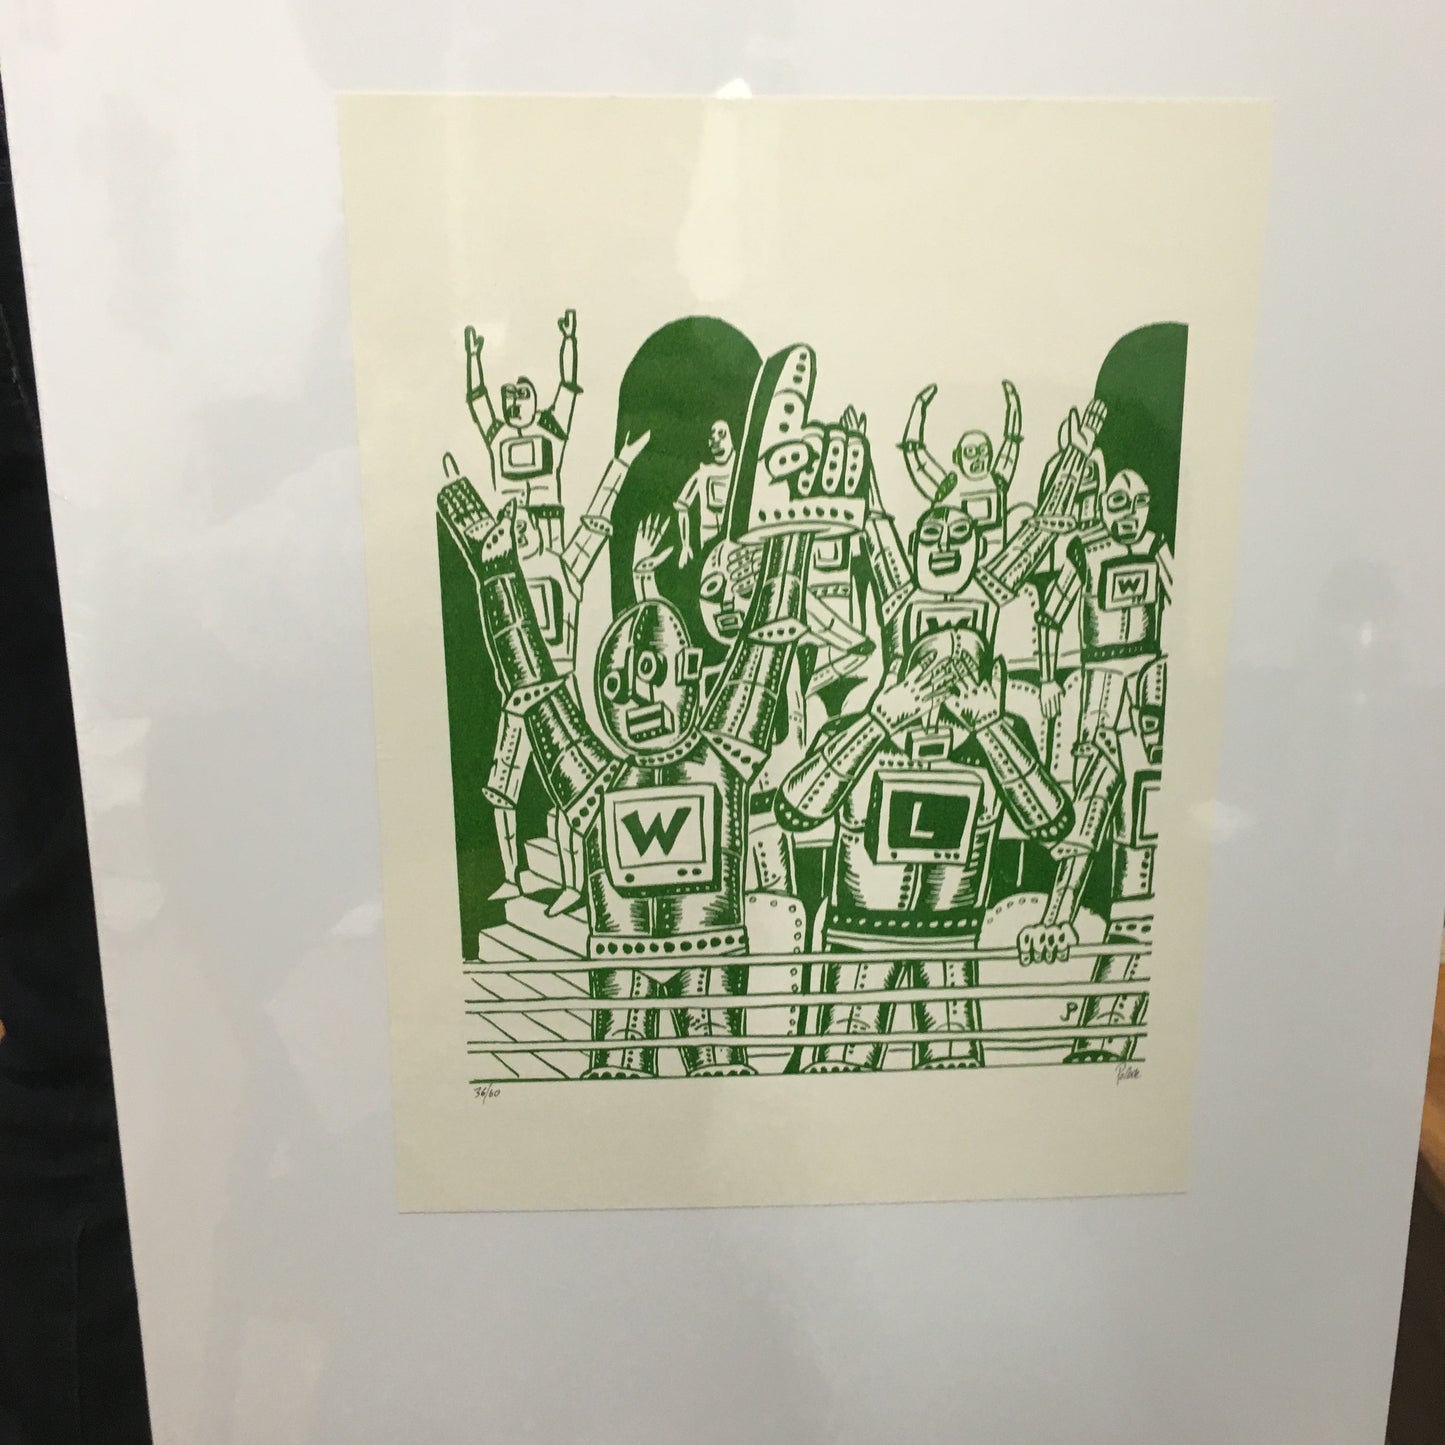 Fanbot numbered ed print